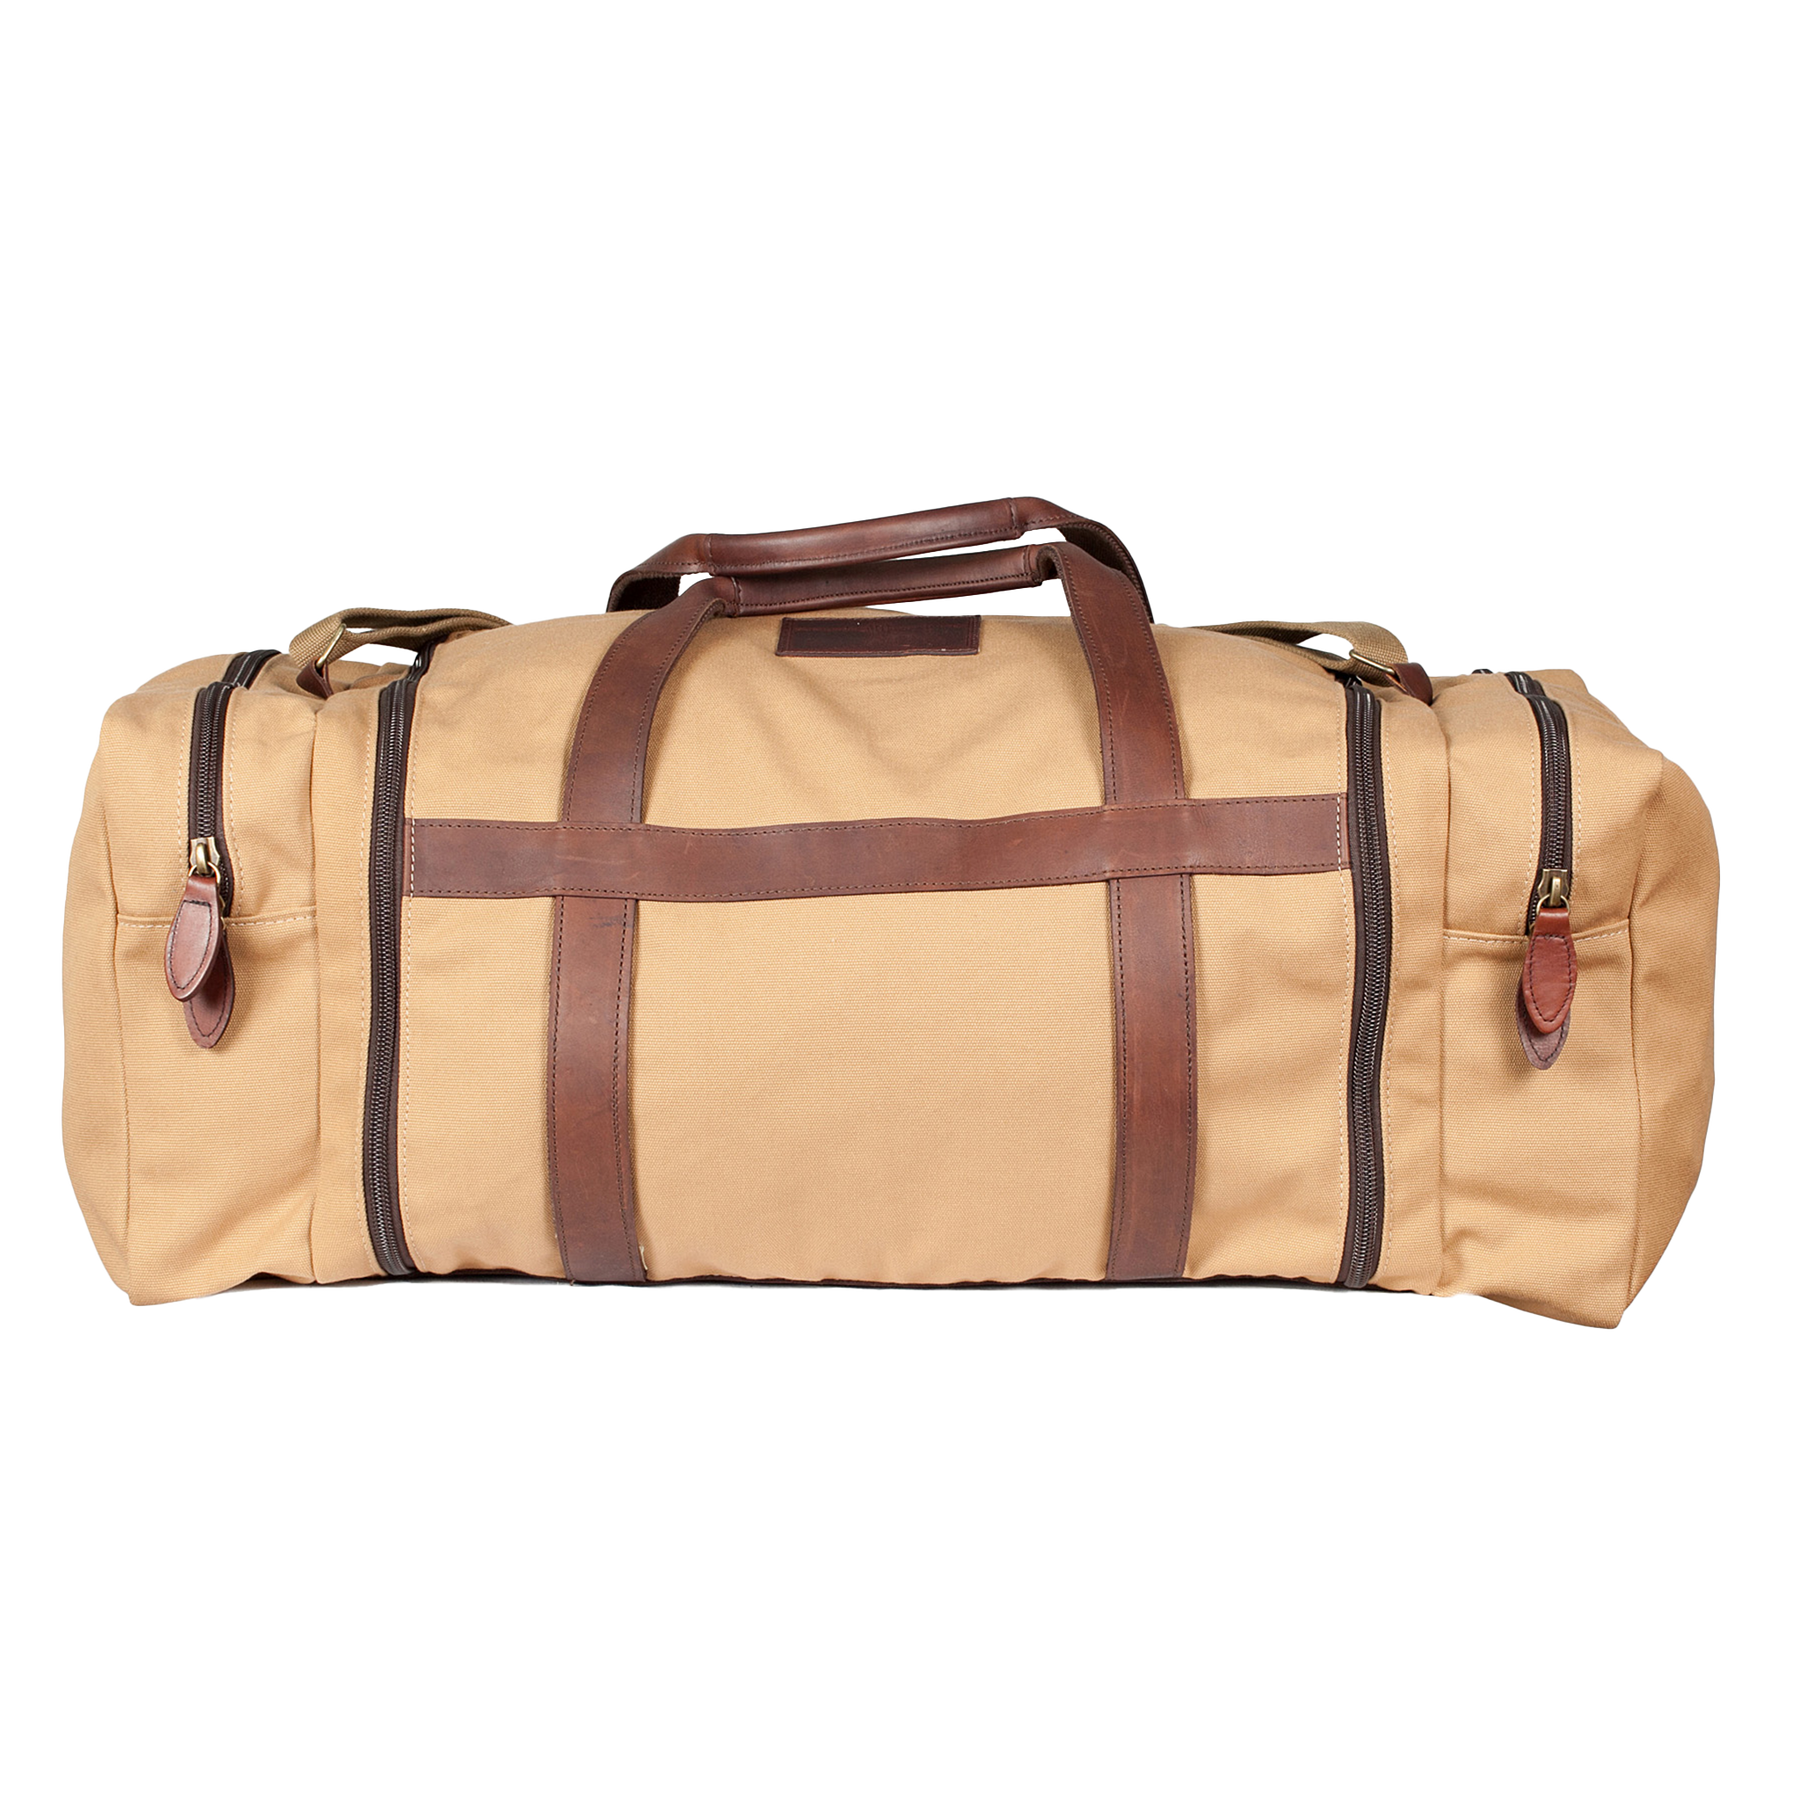 South Bound Bag   Melvill & Moon USA- Overland Kitted